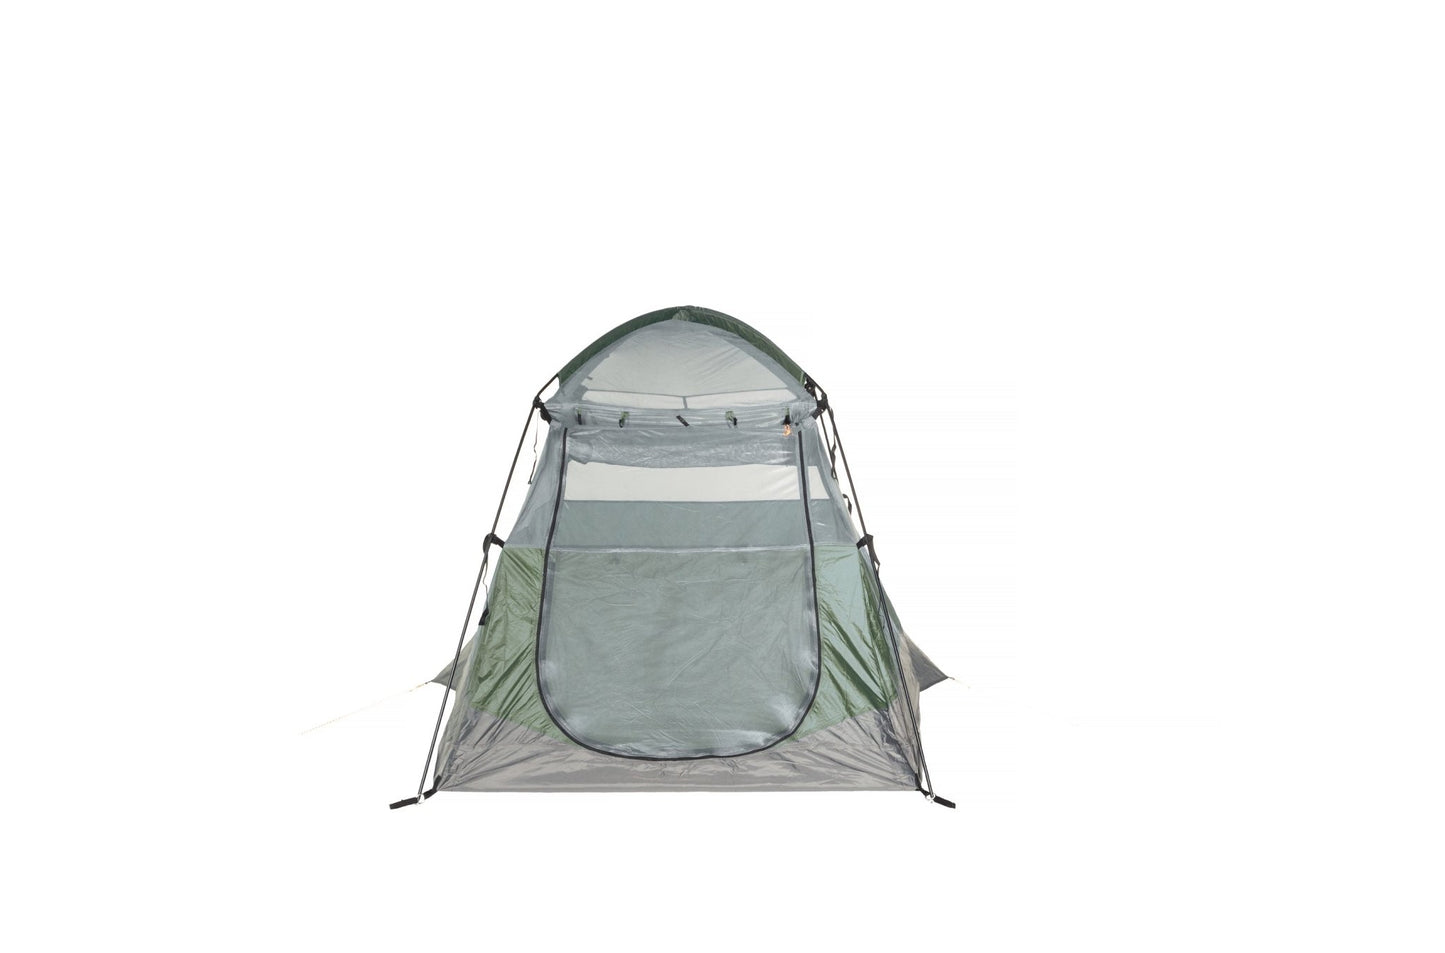 Crua Outdoors - XTent | 2 Person Extendible Dome Tent - Angler's Pro Tackle & Outdoors